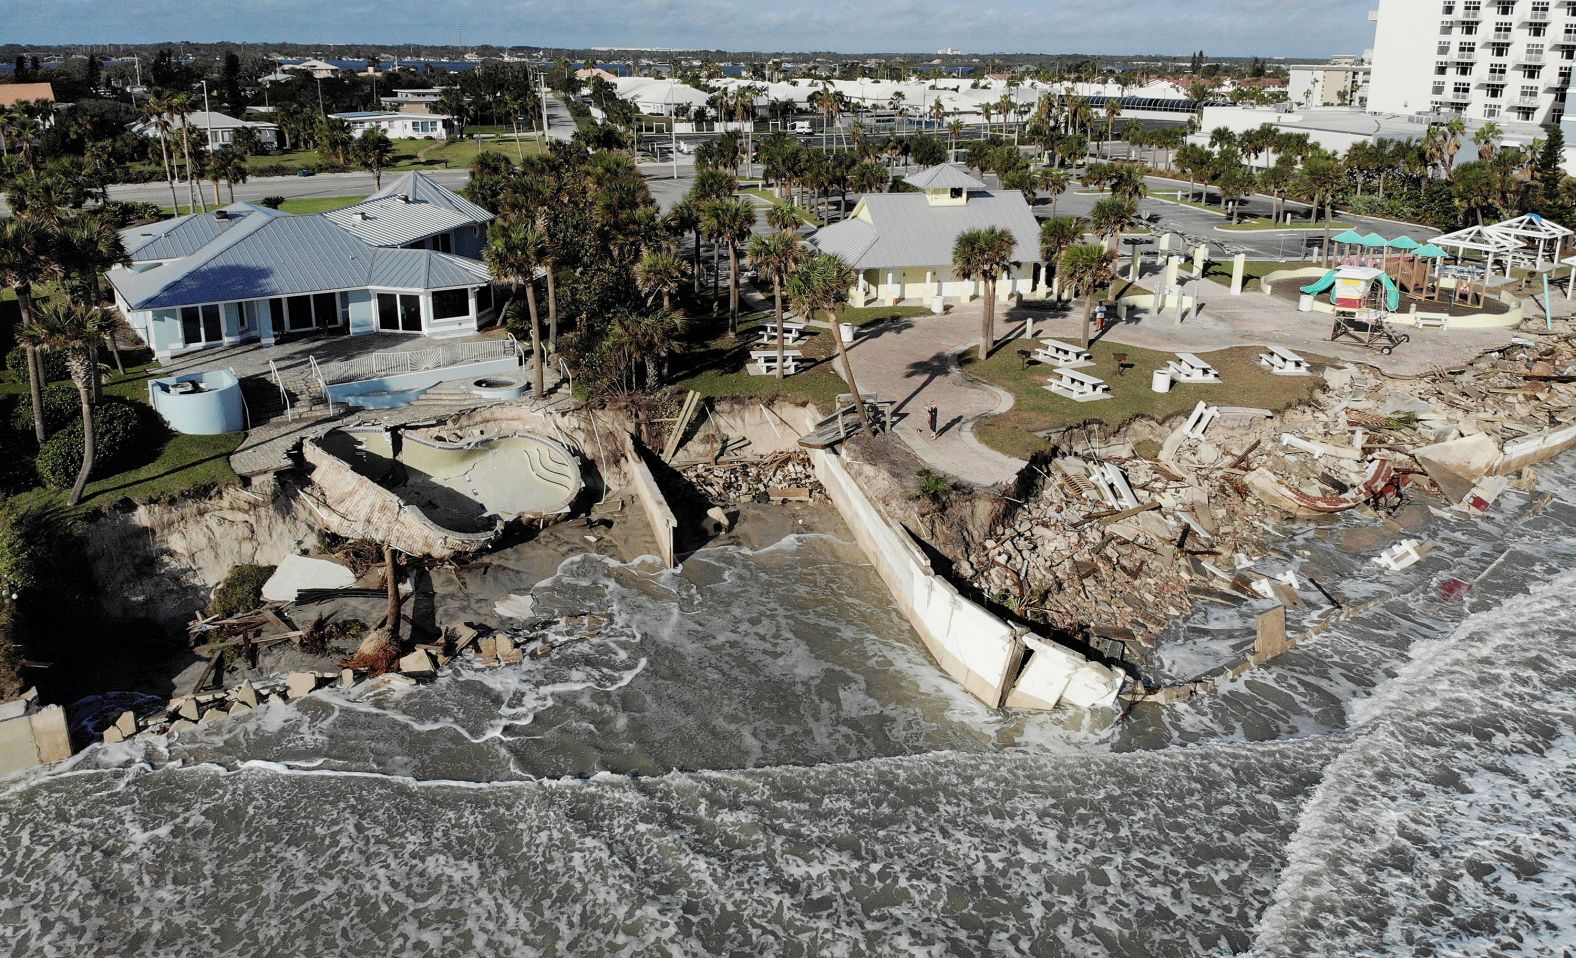 A view shows the destroyed pool of a beachfront house in Daytona Beach Shores on Friday.